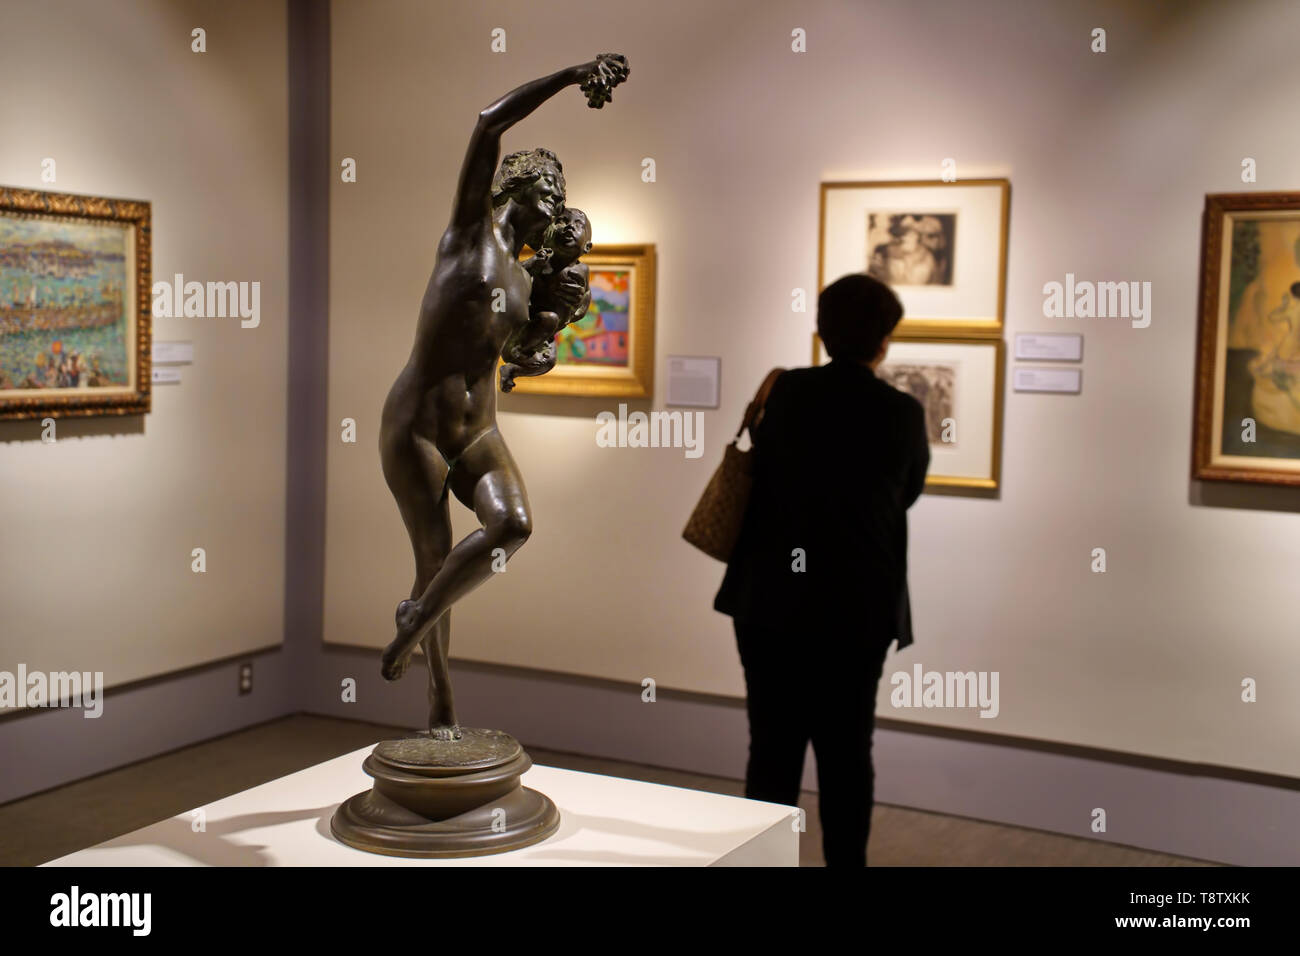 Storrs, CT USA. Oct 2018. Visitors admiring the many works of art at the William Benton Museum of Art on the campus of the University of Connecticut. Stock Photo